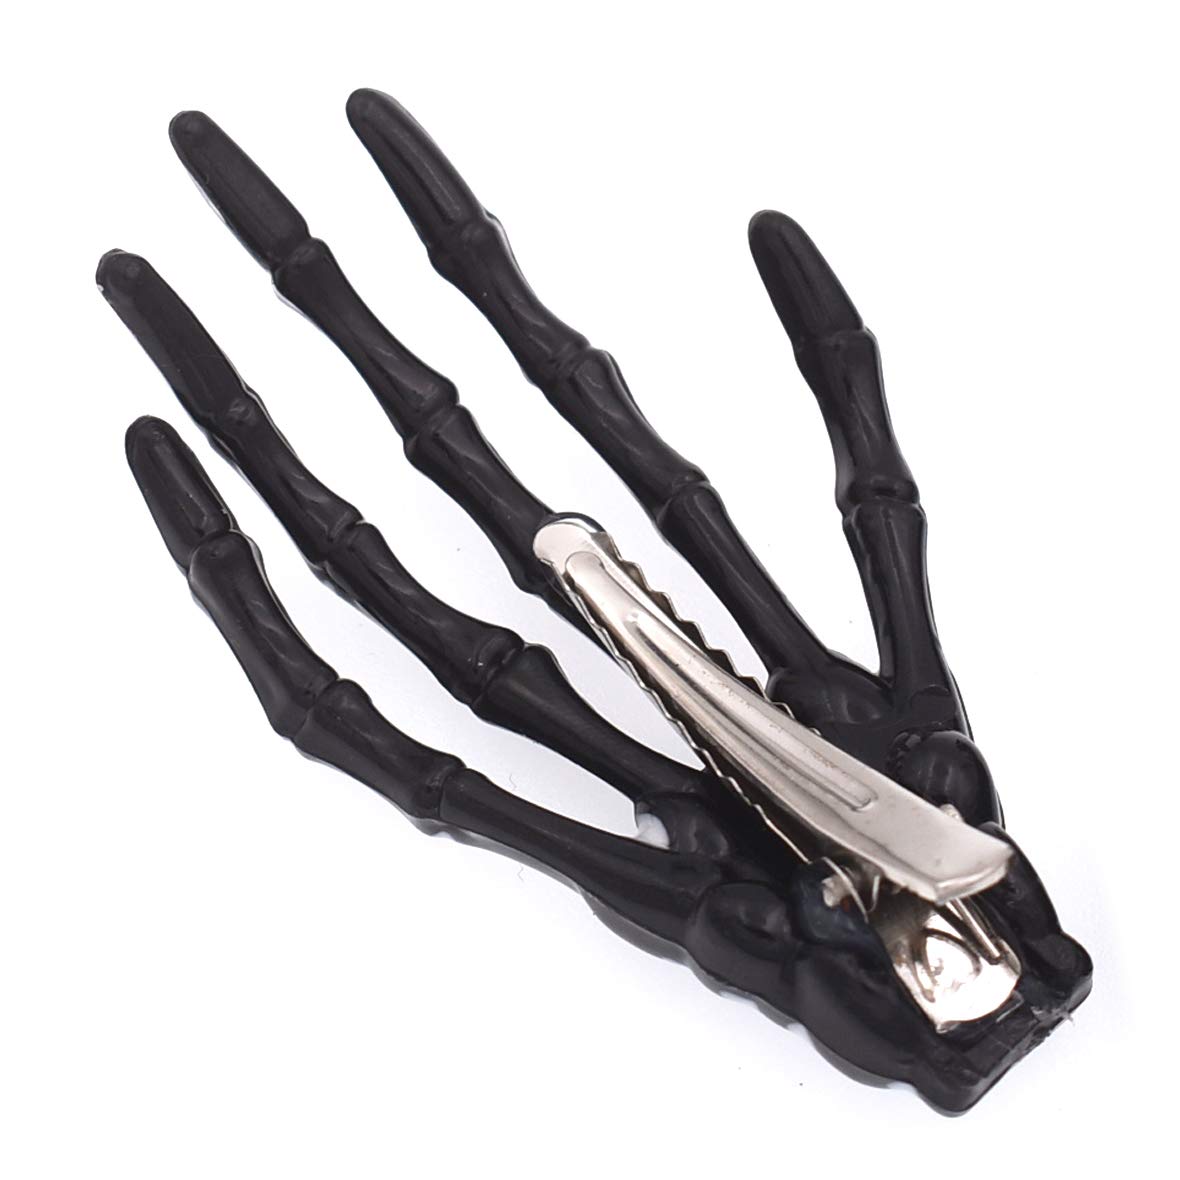 5 Pairs White and Black 3" Skeleton Hands Hair Clips Skull Bone Shape Hairpins Halloween Party Accessories